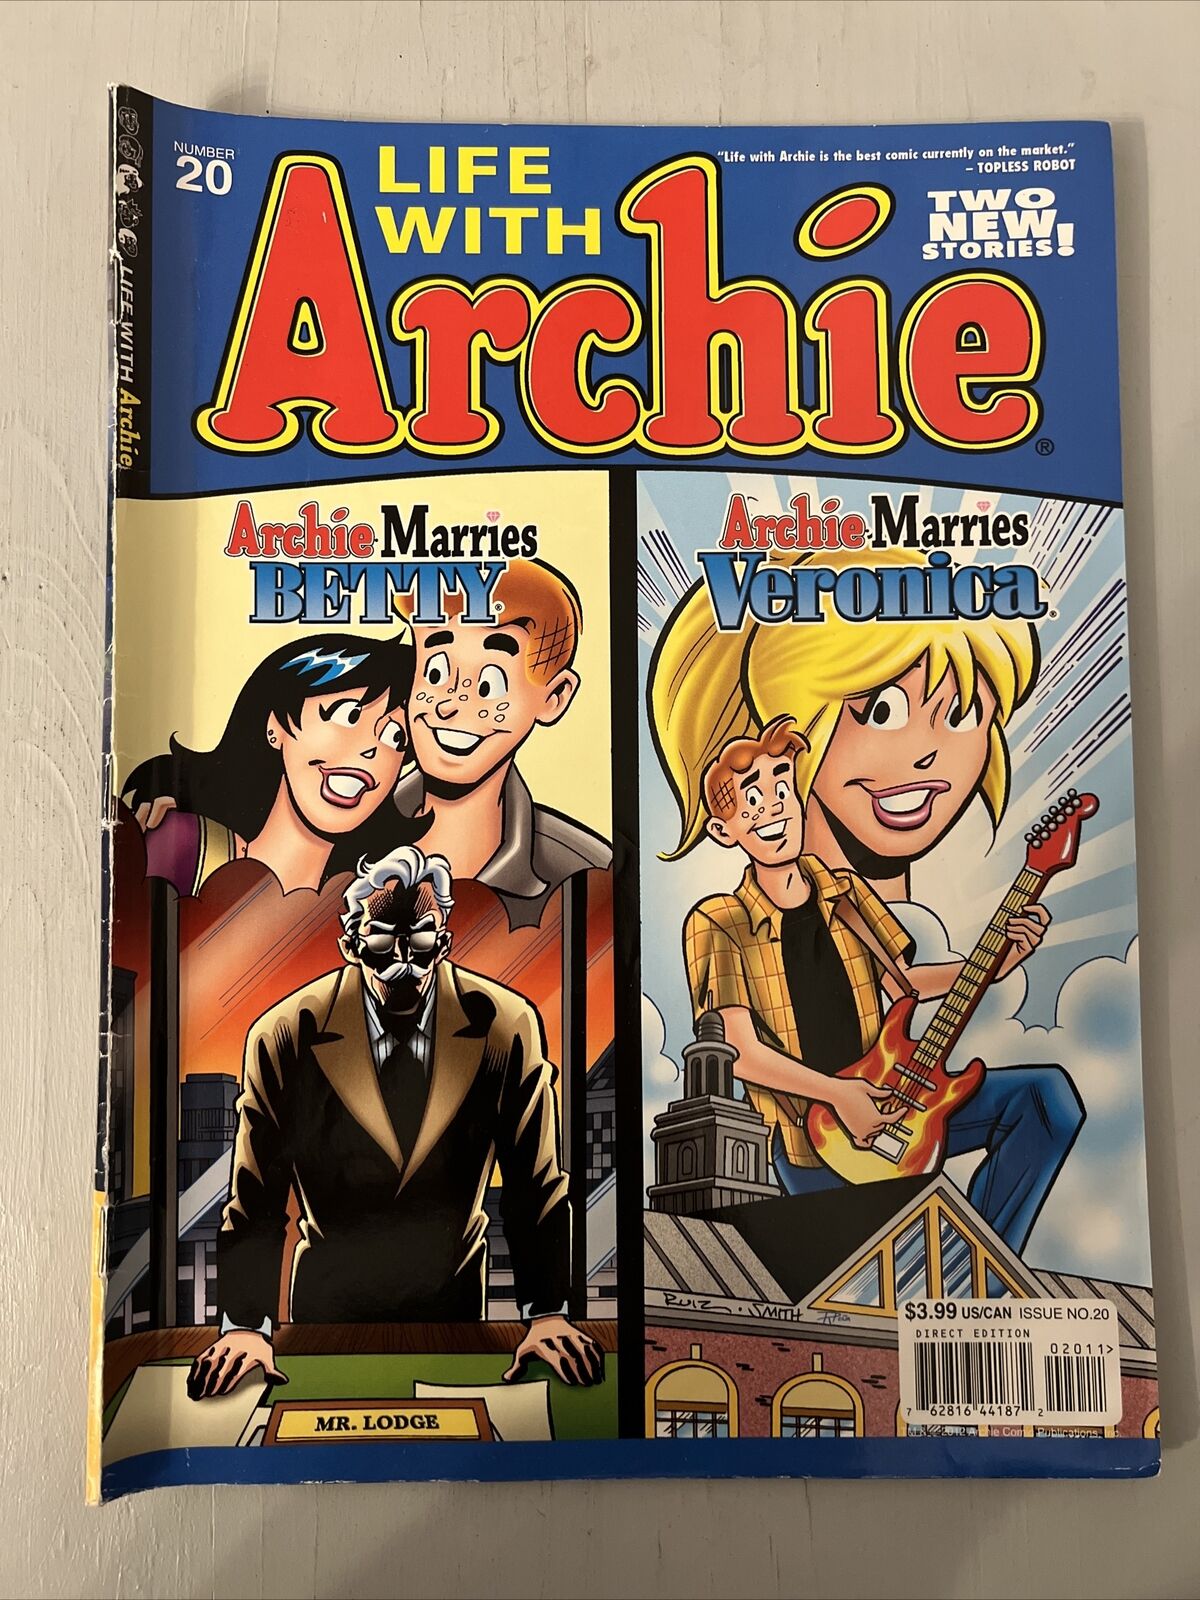 ARCHIE COMICS ISSUE#20 COMIC BOOK MAGAZINE (PRE-OWNED)